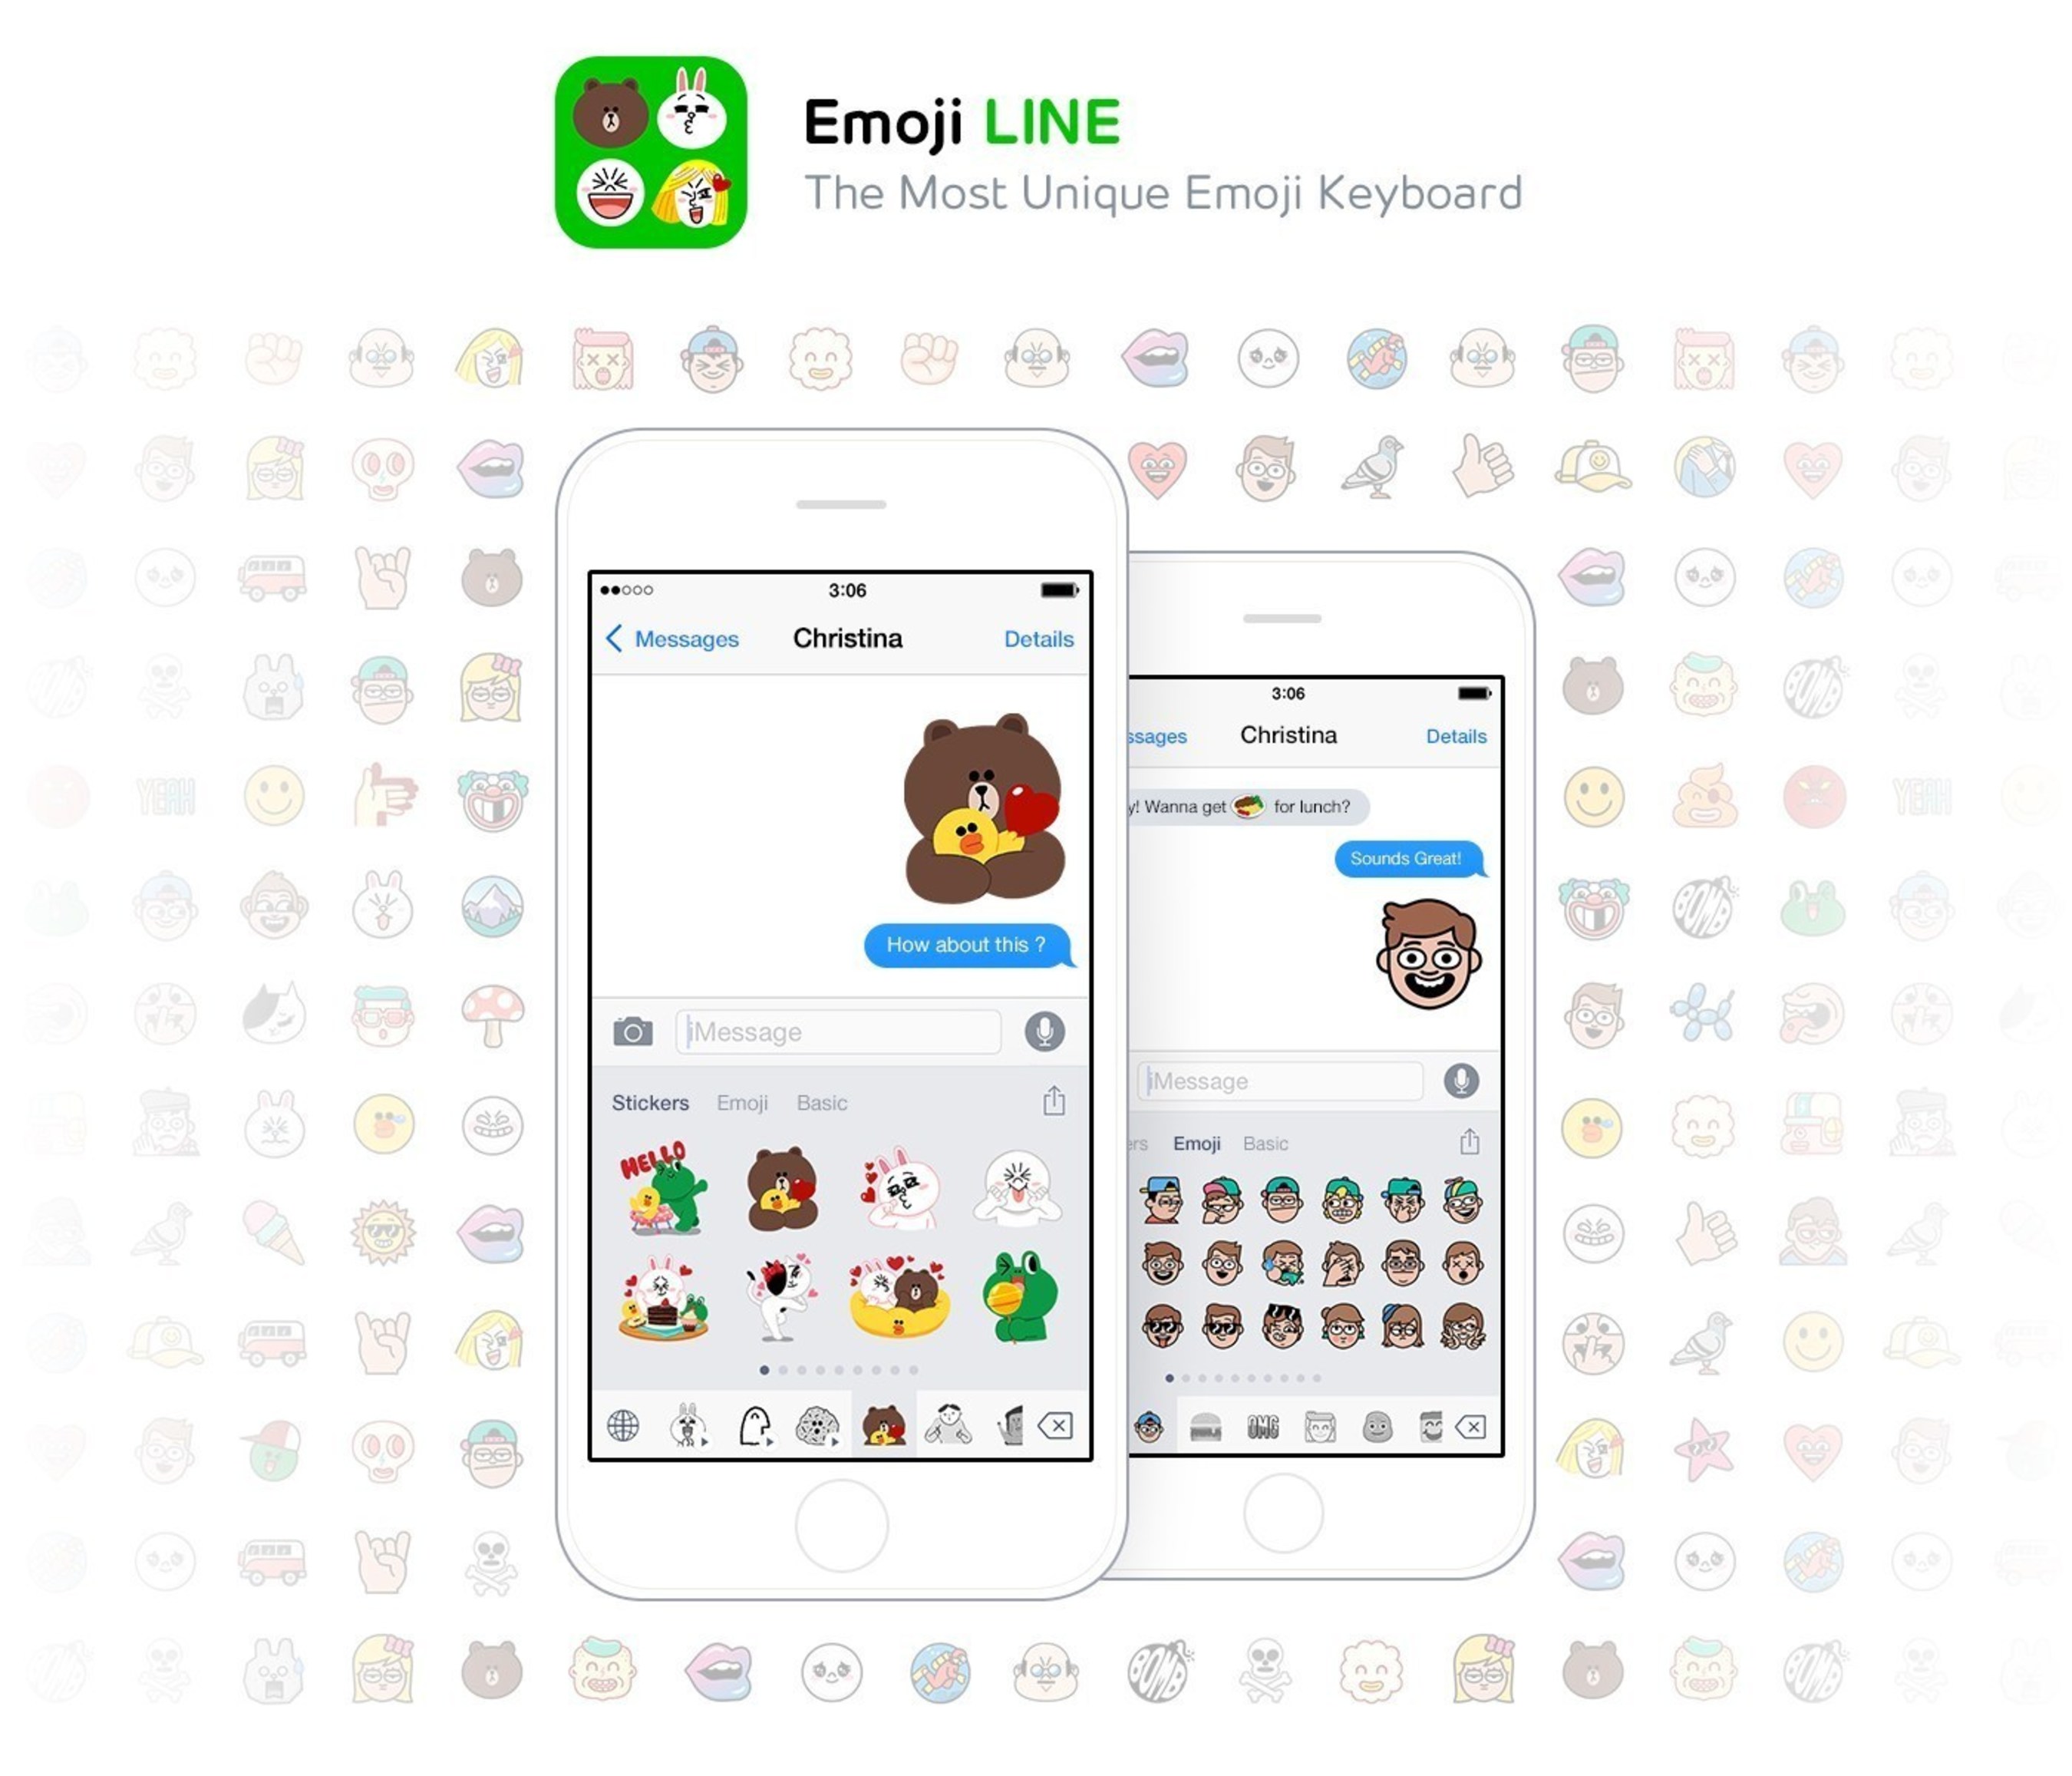 LINE, the Pioneer of Stickers, Officially Launches Keyboard App "Emoji LINE"